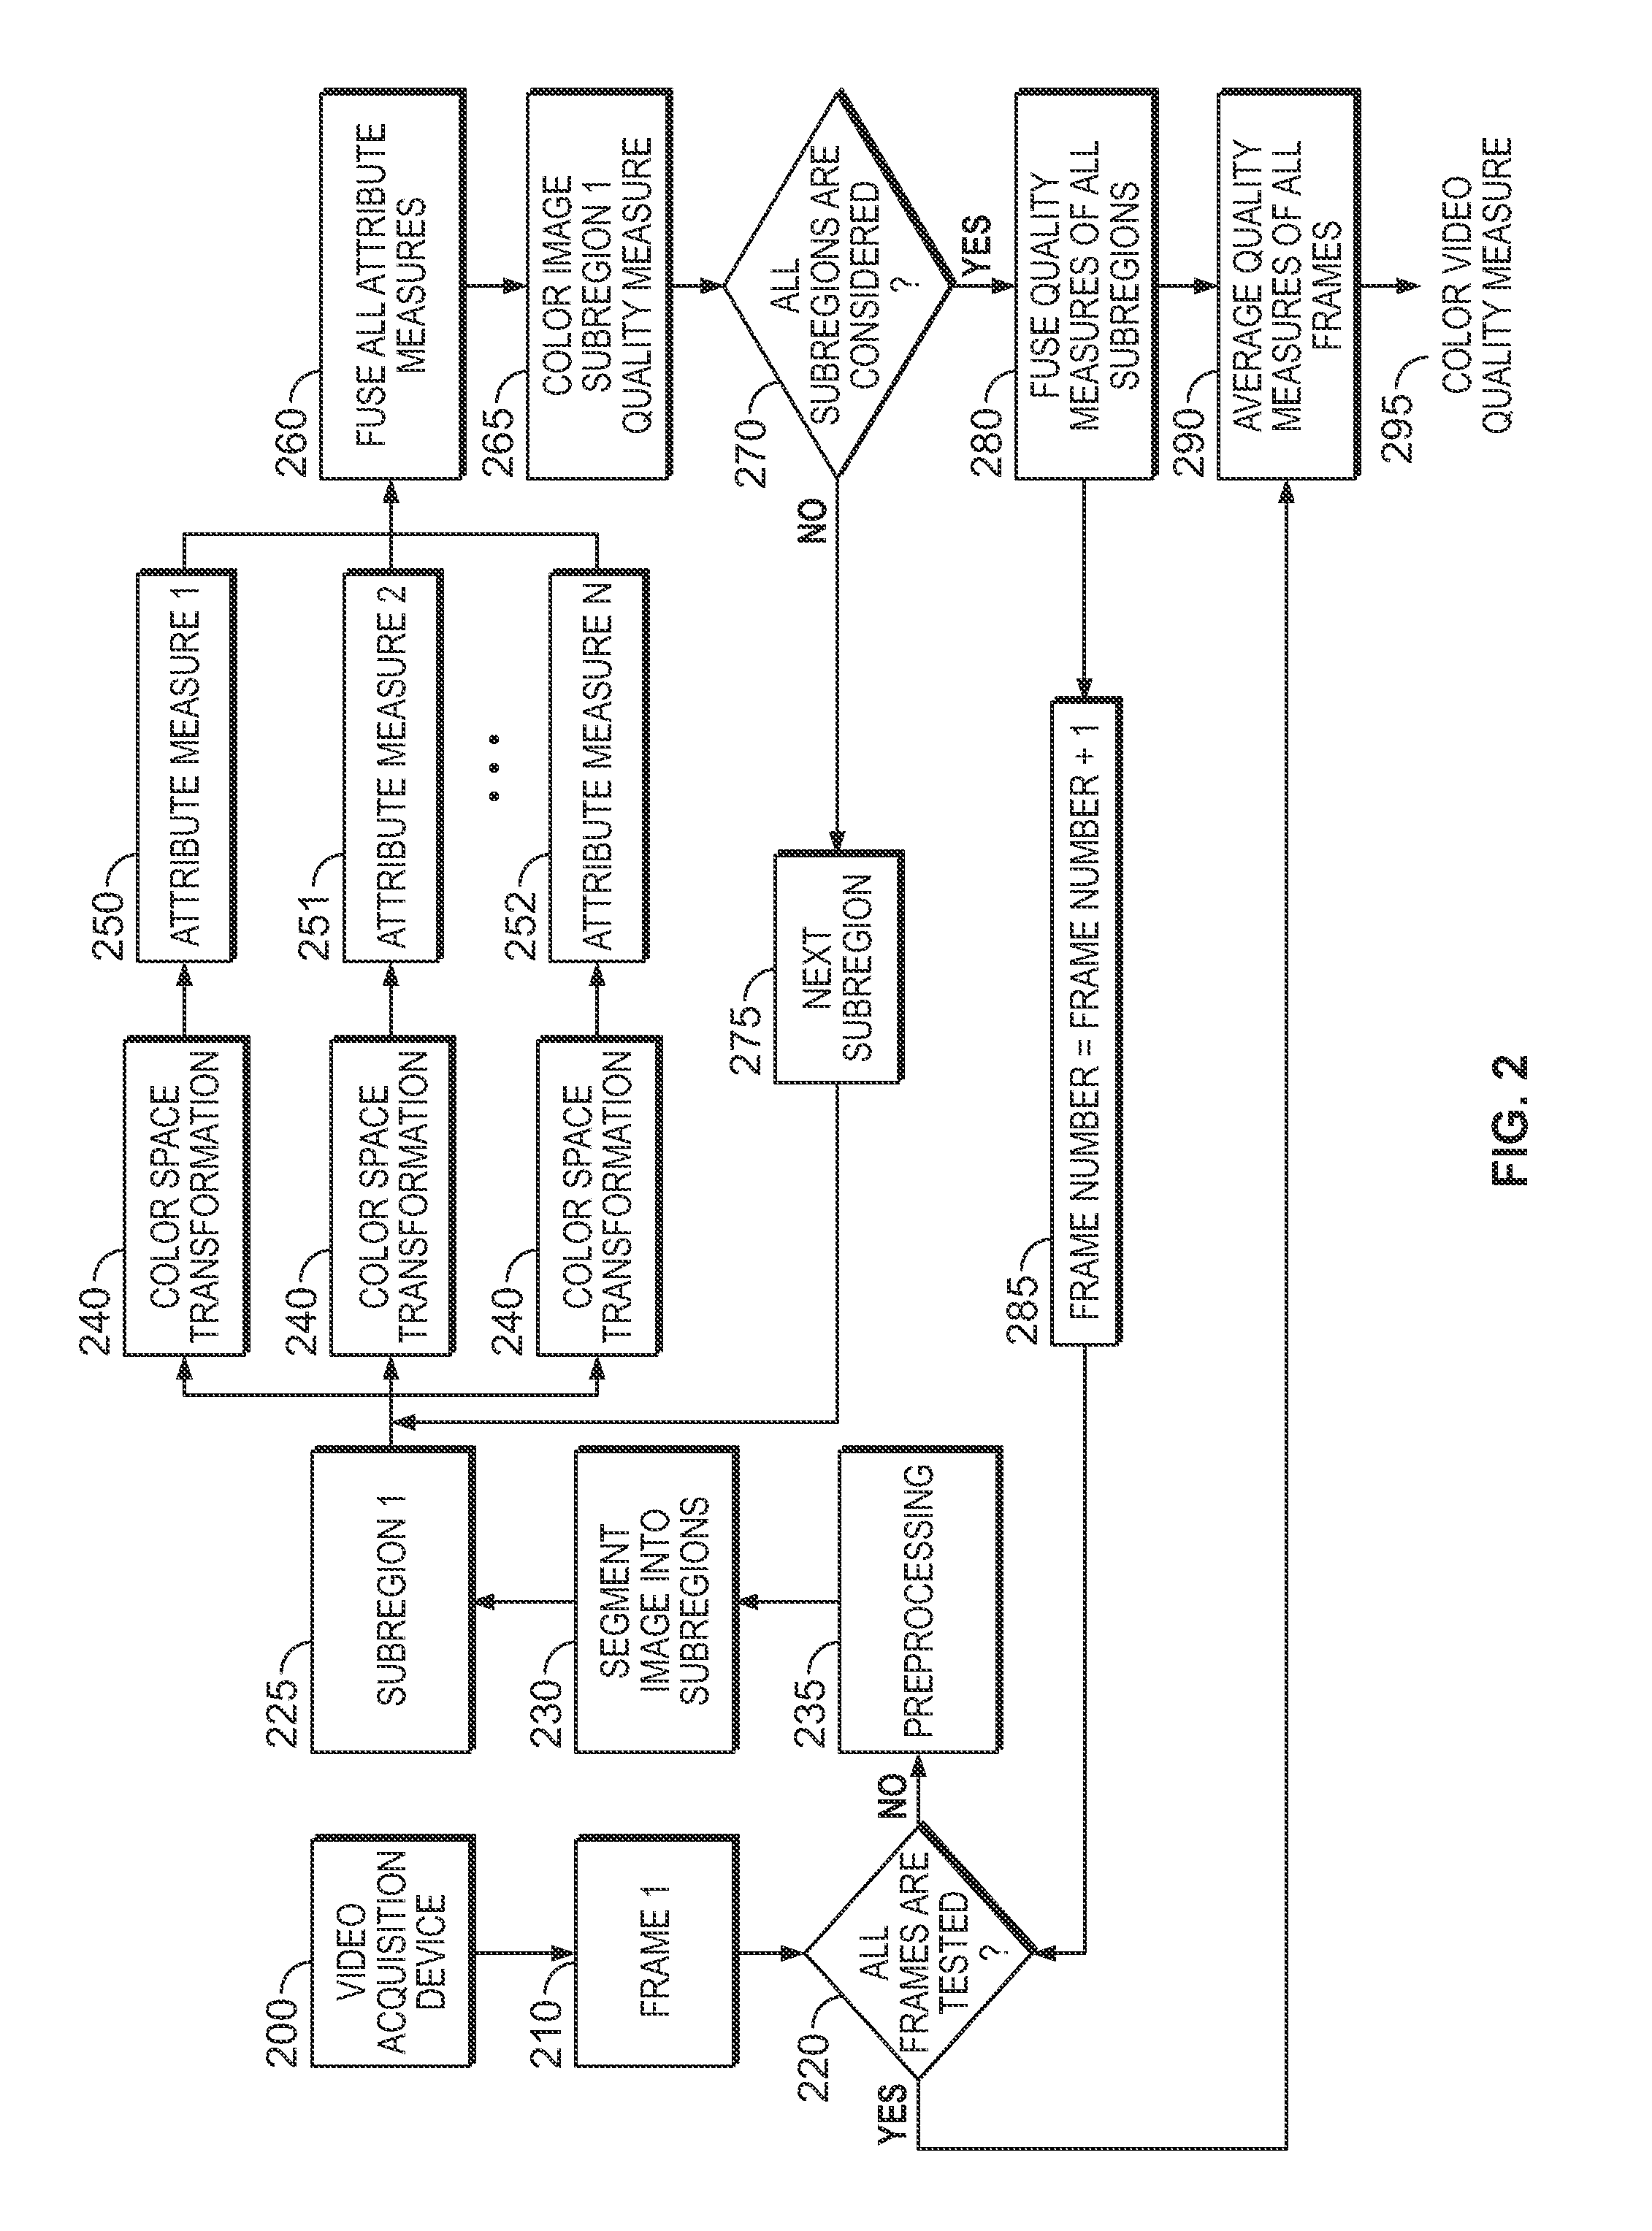 Systems and methods for image and video signal measurement